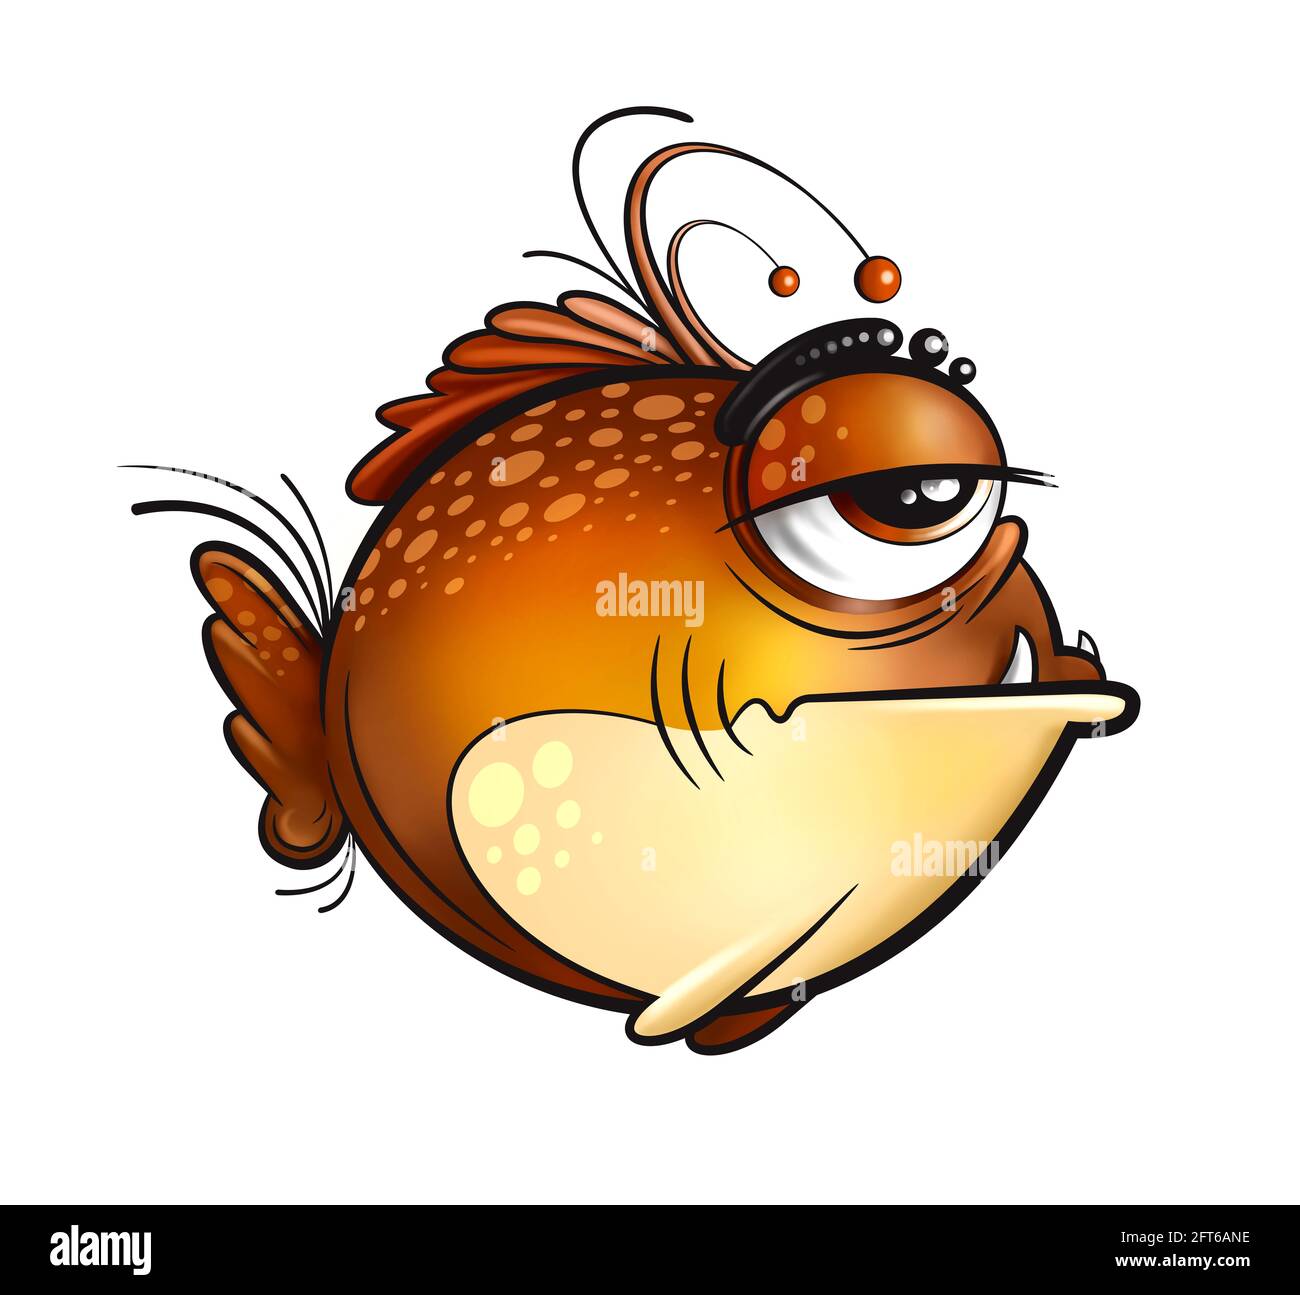 Lazy monster fish, cartoon, mascot, isolated on a white background Stock Photo